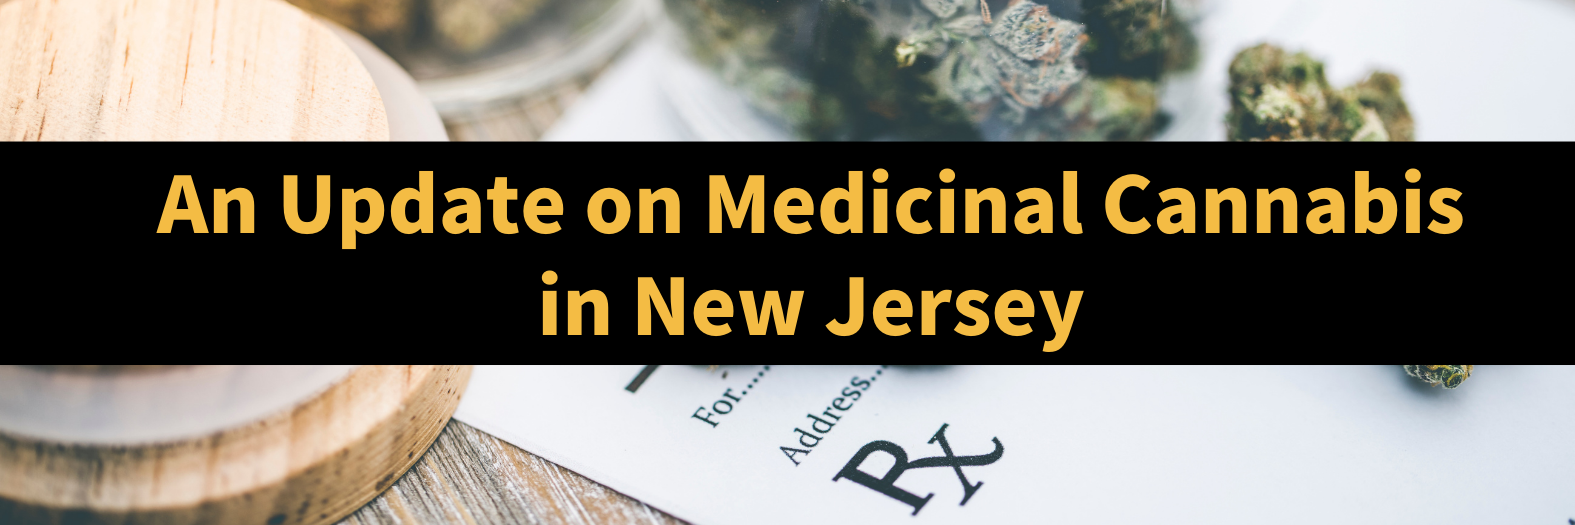 An Update on Medicinal Cannabis in New Jersey